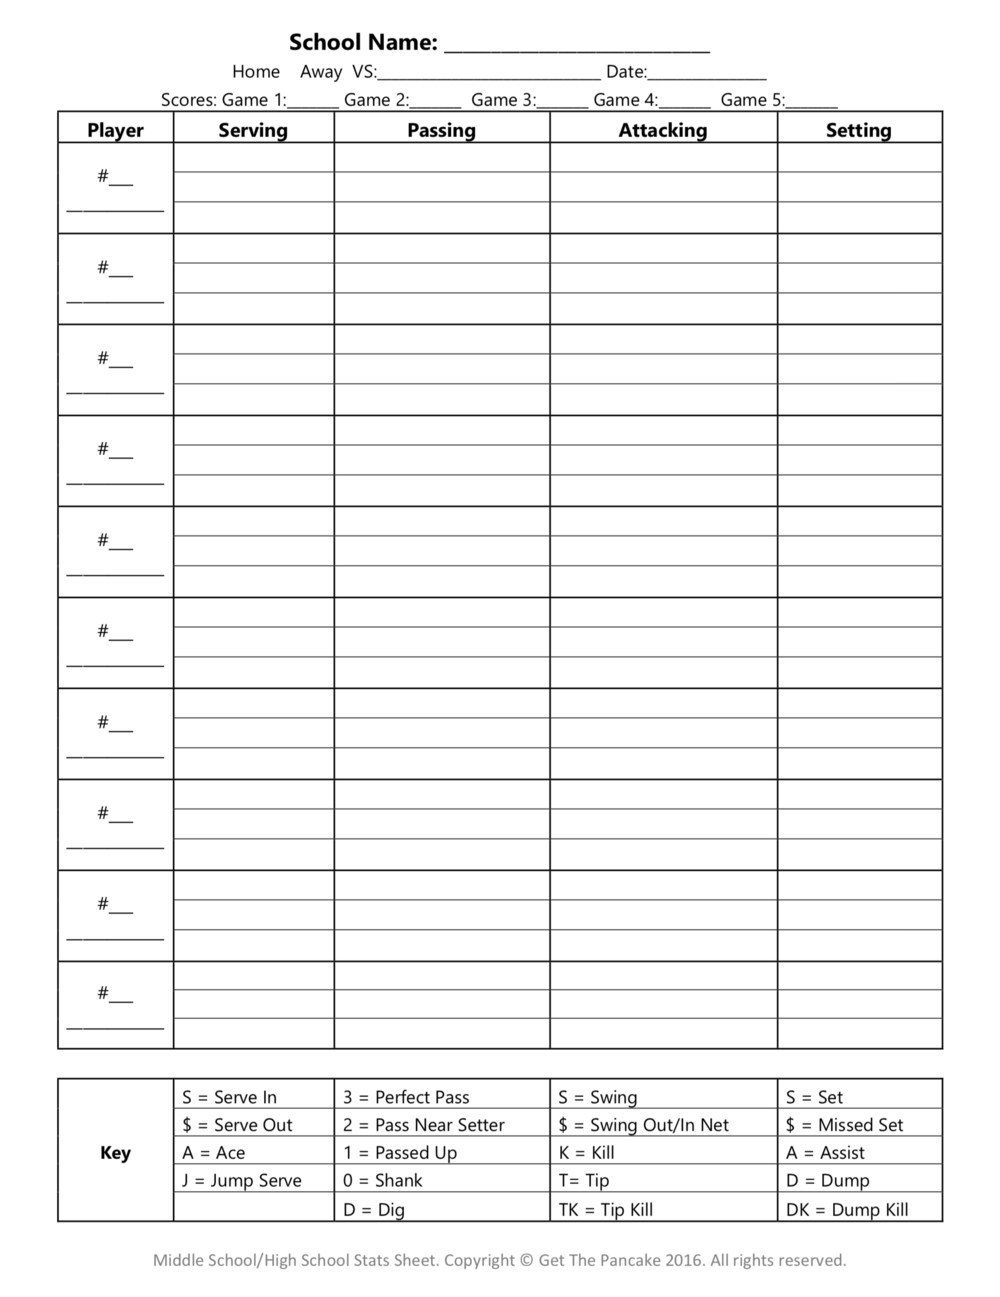 Free Volleyball Stats Sheets — Get The Pancake | A Website For - Printable Volleyball Stat Sheets Free